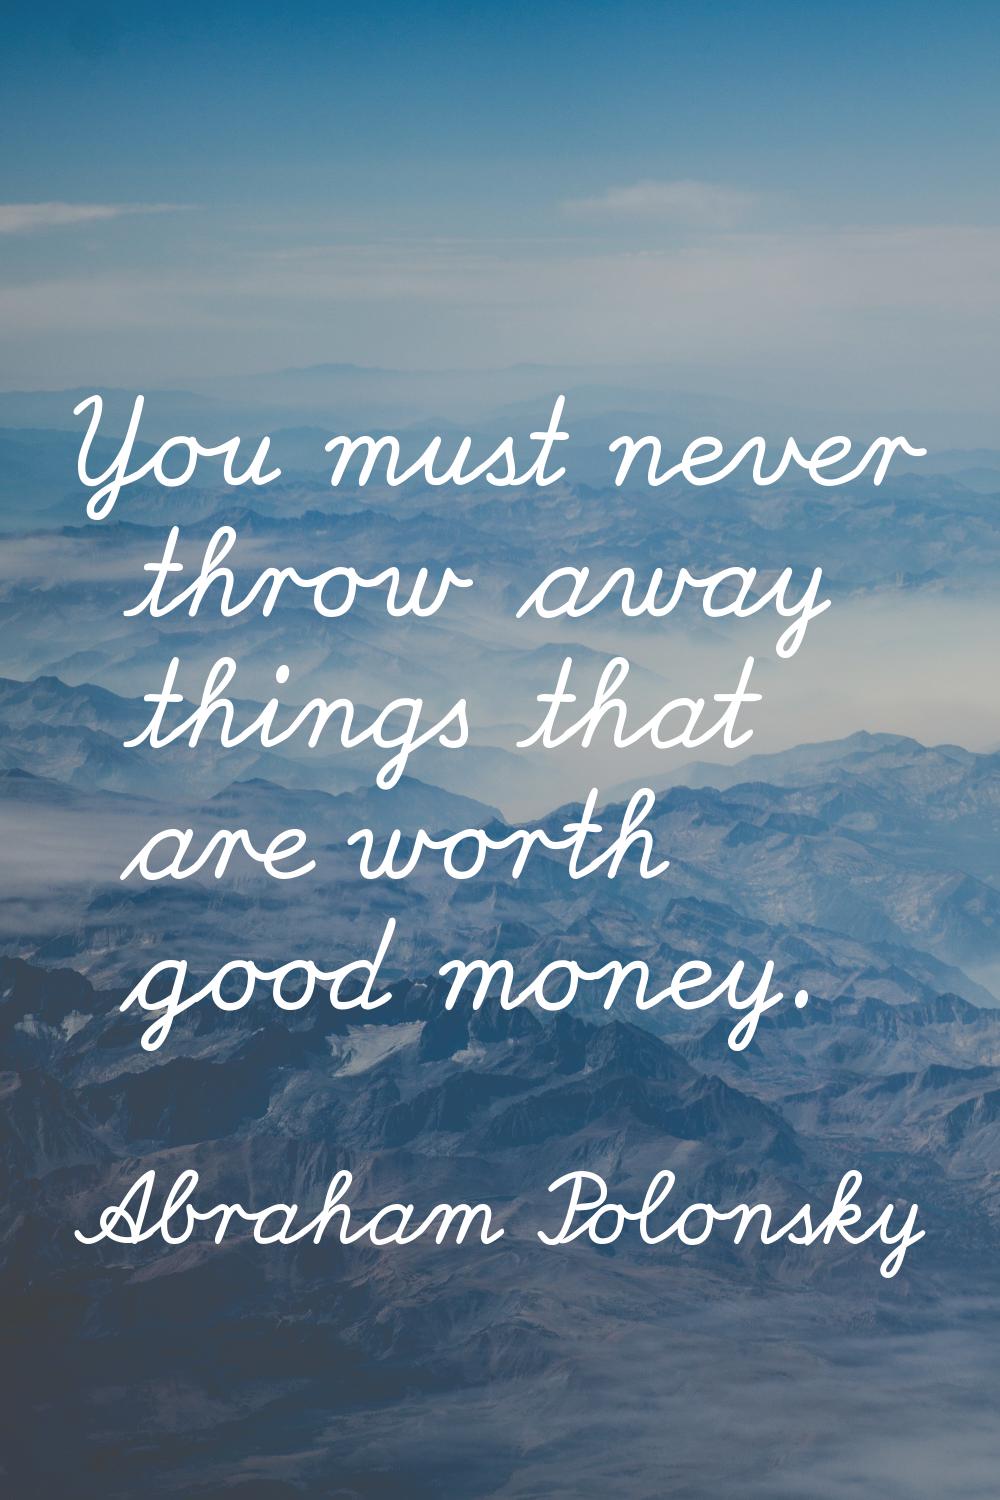 You must never throw away things that are worth good money.